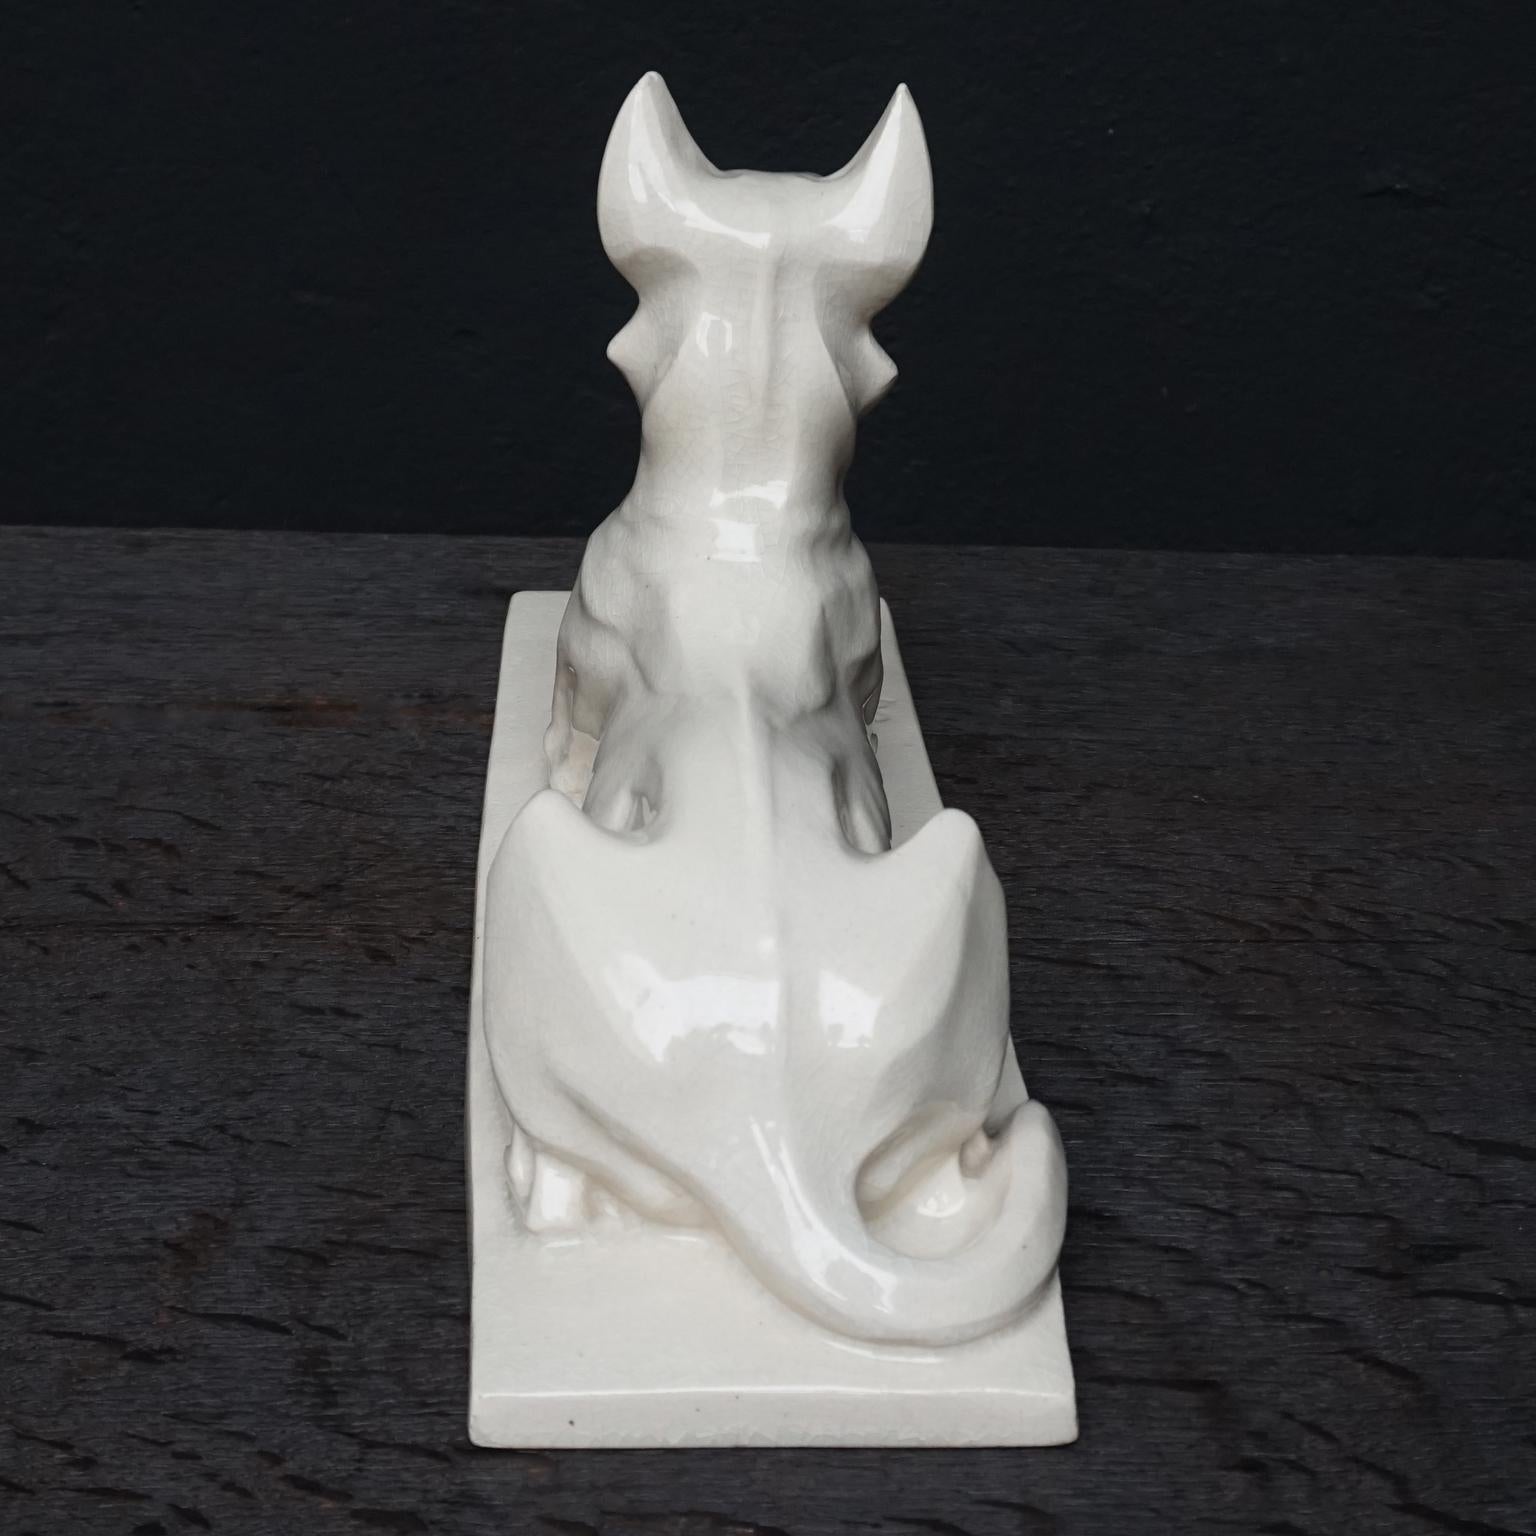 20th Century 1920s Art Deco French Ceramic Shepherd Dog Statue by Charles Louis Eugène Virion For Sale